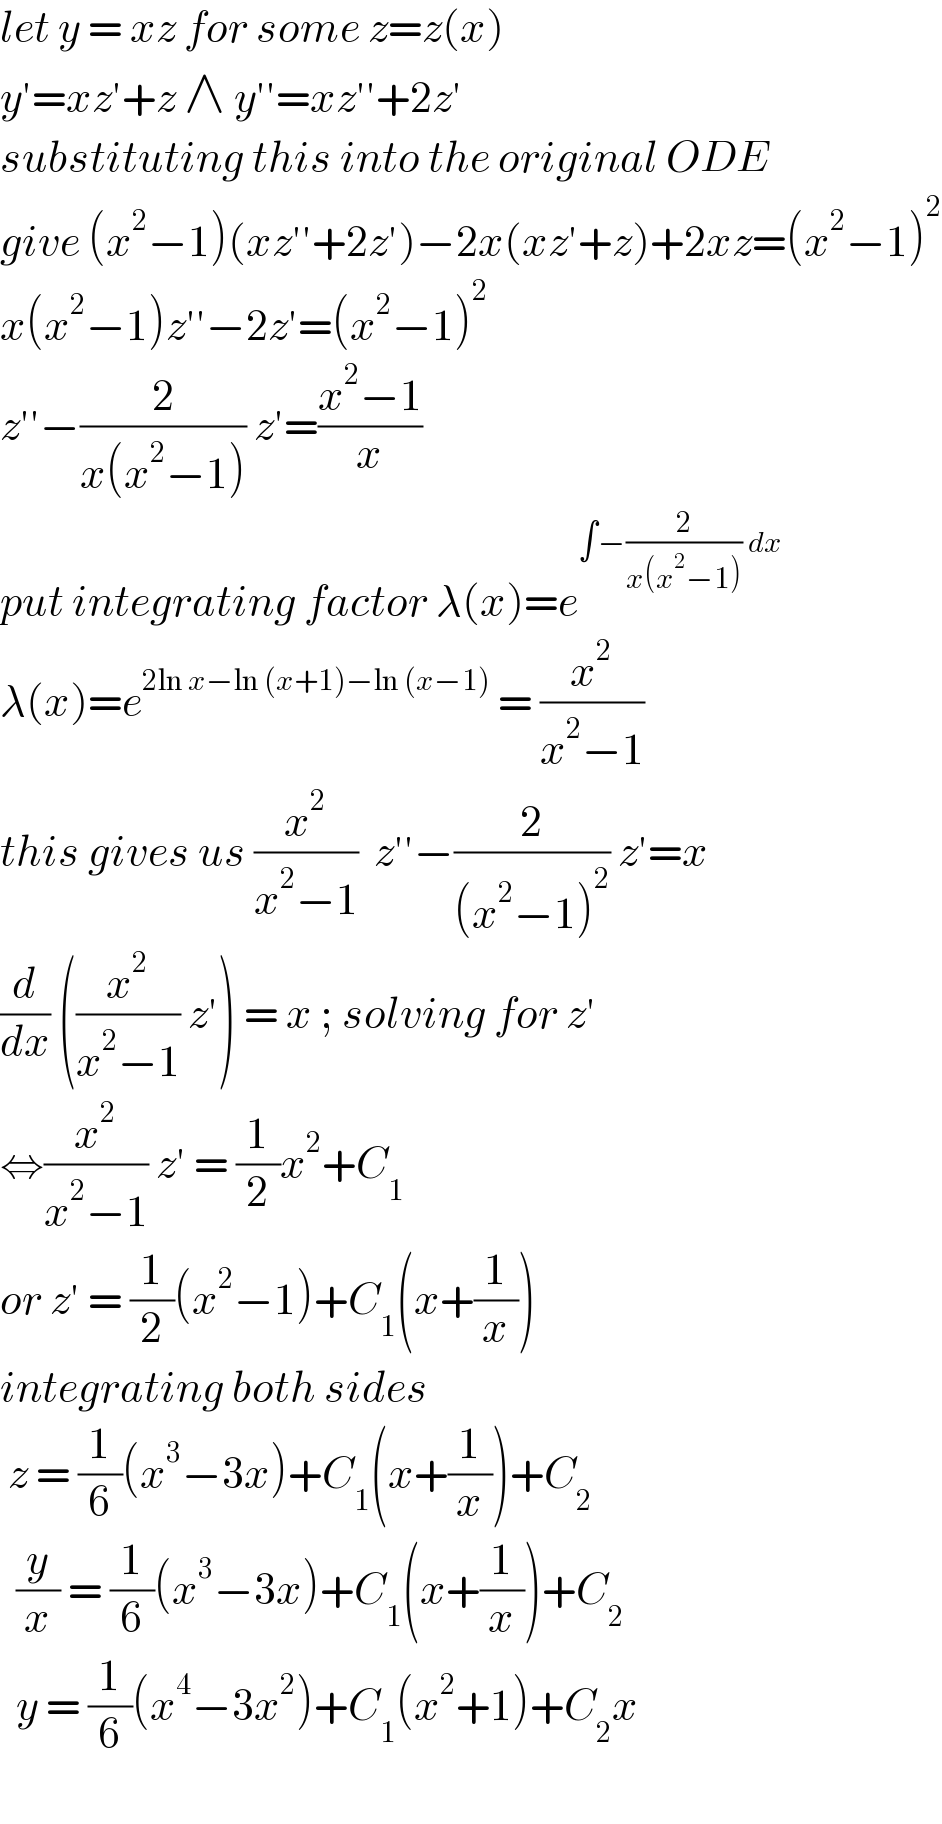 let y = xz for some z=z(x)  y′=xz′+z ∧ y′′=xz′′+2z′  substituting this into the original ODE  give (x^2 −1)(xz′′+2z′)−2x(xz′+z)+2xz=(x^2 −1)^2   x(x^2 −1)z′′−2z′=(x^2 −1)^2   z′′−(2/(x(x^2 −1))) z′=((x^2 −1)/x)  put integrating factor λ(x)=e^(∫−(2/(x(x^2 −1))) dx)   λ(x)=e^(2ln x−ln (x+1)−ln (x−1))  = (x^2 /(x^2 −1))  this gives us (x^2 /(x^2 −1))  z′′−(2/((x^2 −1)^2 )) z′=x  (d/dx) ((x^2 /(x^2 −1)) z′) = x ; solving for z′  ⇔(x^2 /(x^2 −1)) z′ = (1/2)x^2 +C_1   or z′ = (1/2)(x^2 −1)+C_1 (x+(1/x))  integrating both sides    z = (1/6)(x^3 −3x)+C_1 (x+(1/x))+C_2     (y/x) = (1/6)(x^3 −3x)+C_1 (x+(1/x))+C_2     y = (1/6)(x^4 −3x^2 )+C_1 (x^2 +1)+C_2 x     